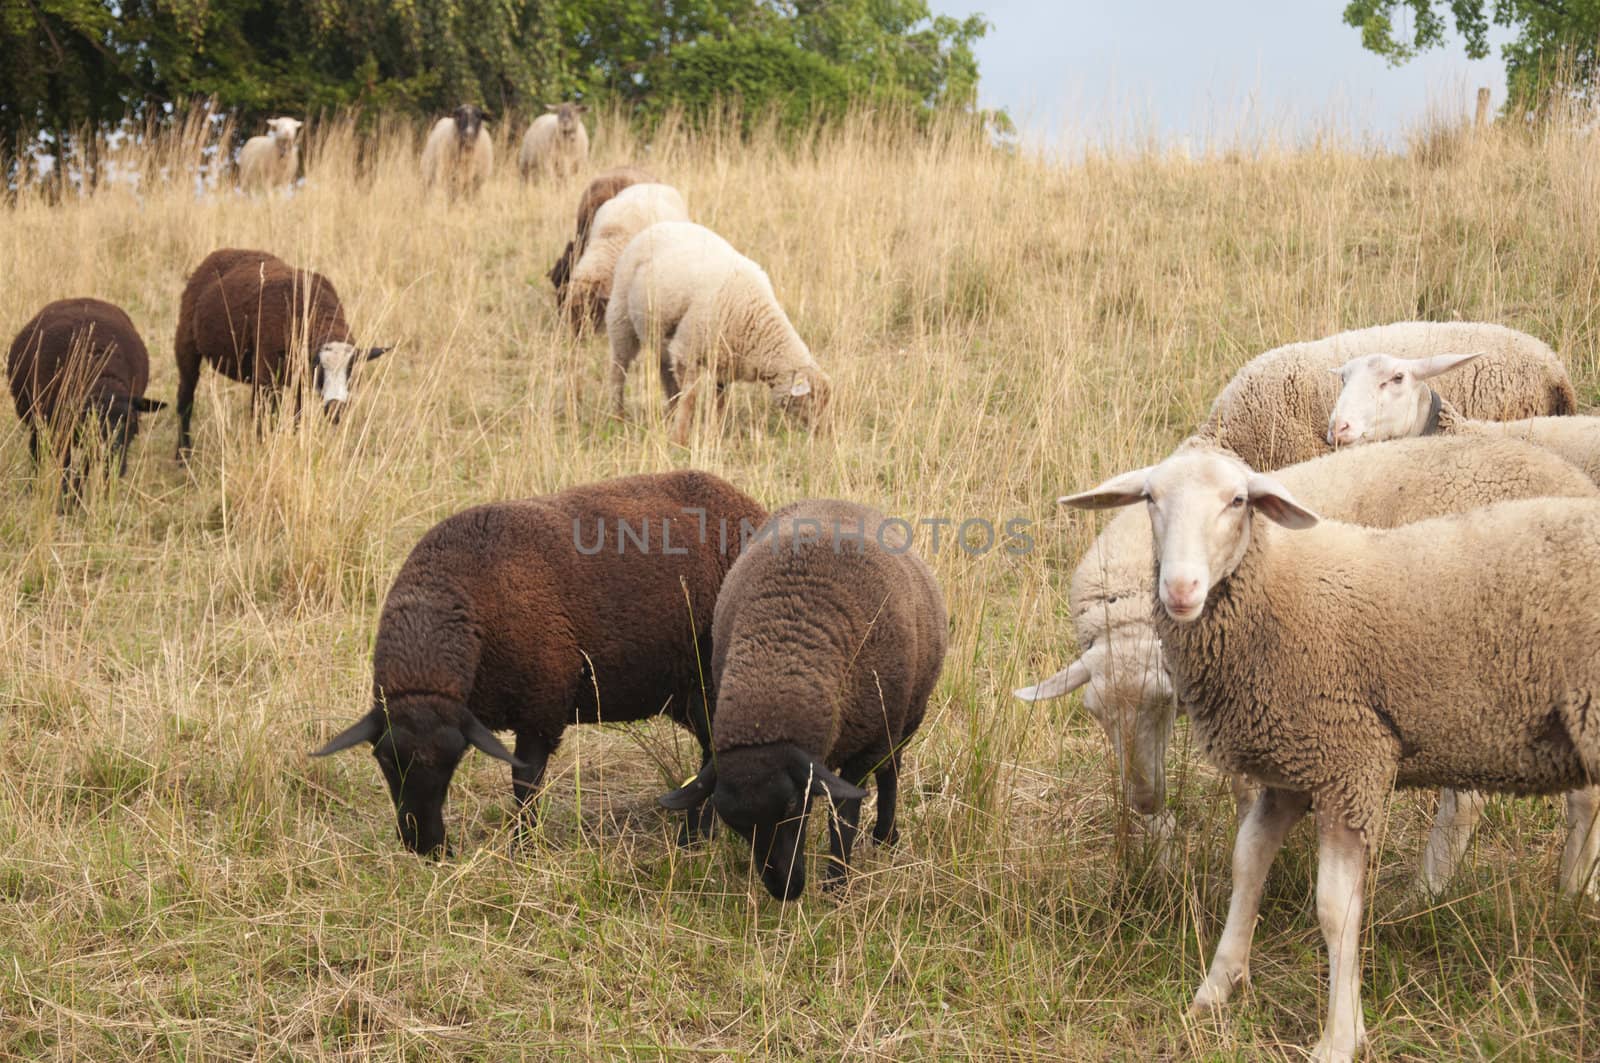 White Sheep and Brown Sheep grazing in a field in Switzerland by kdreams02